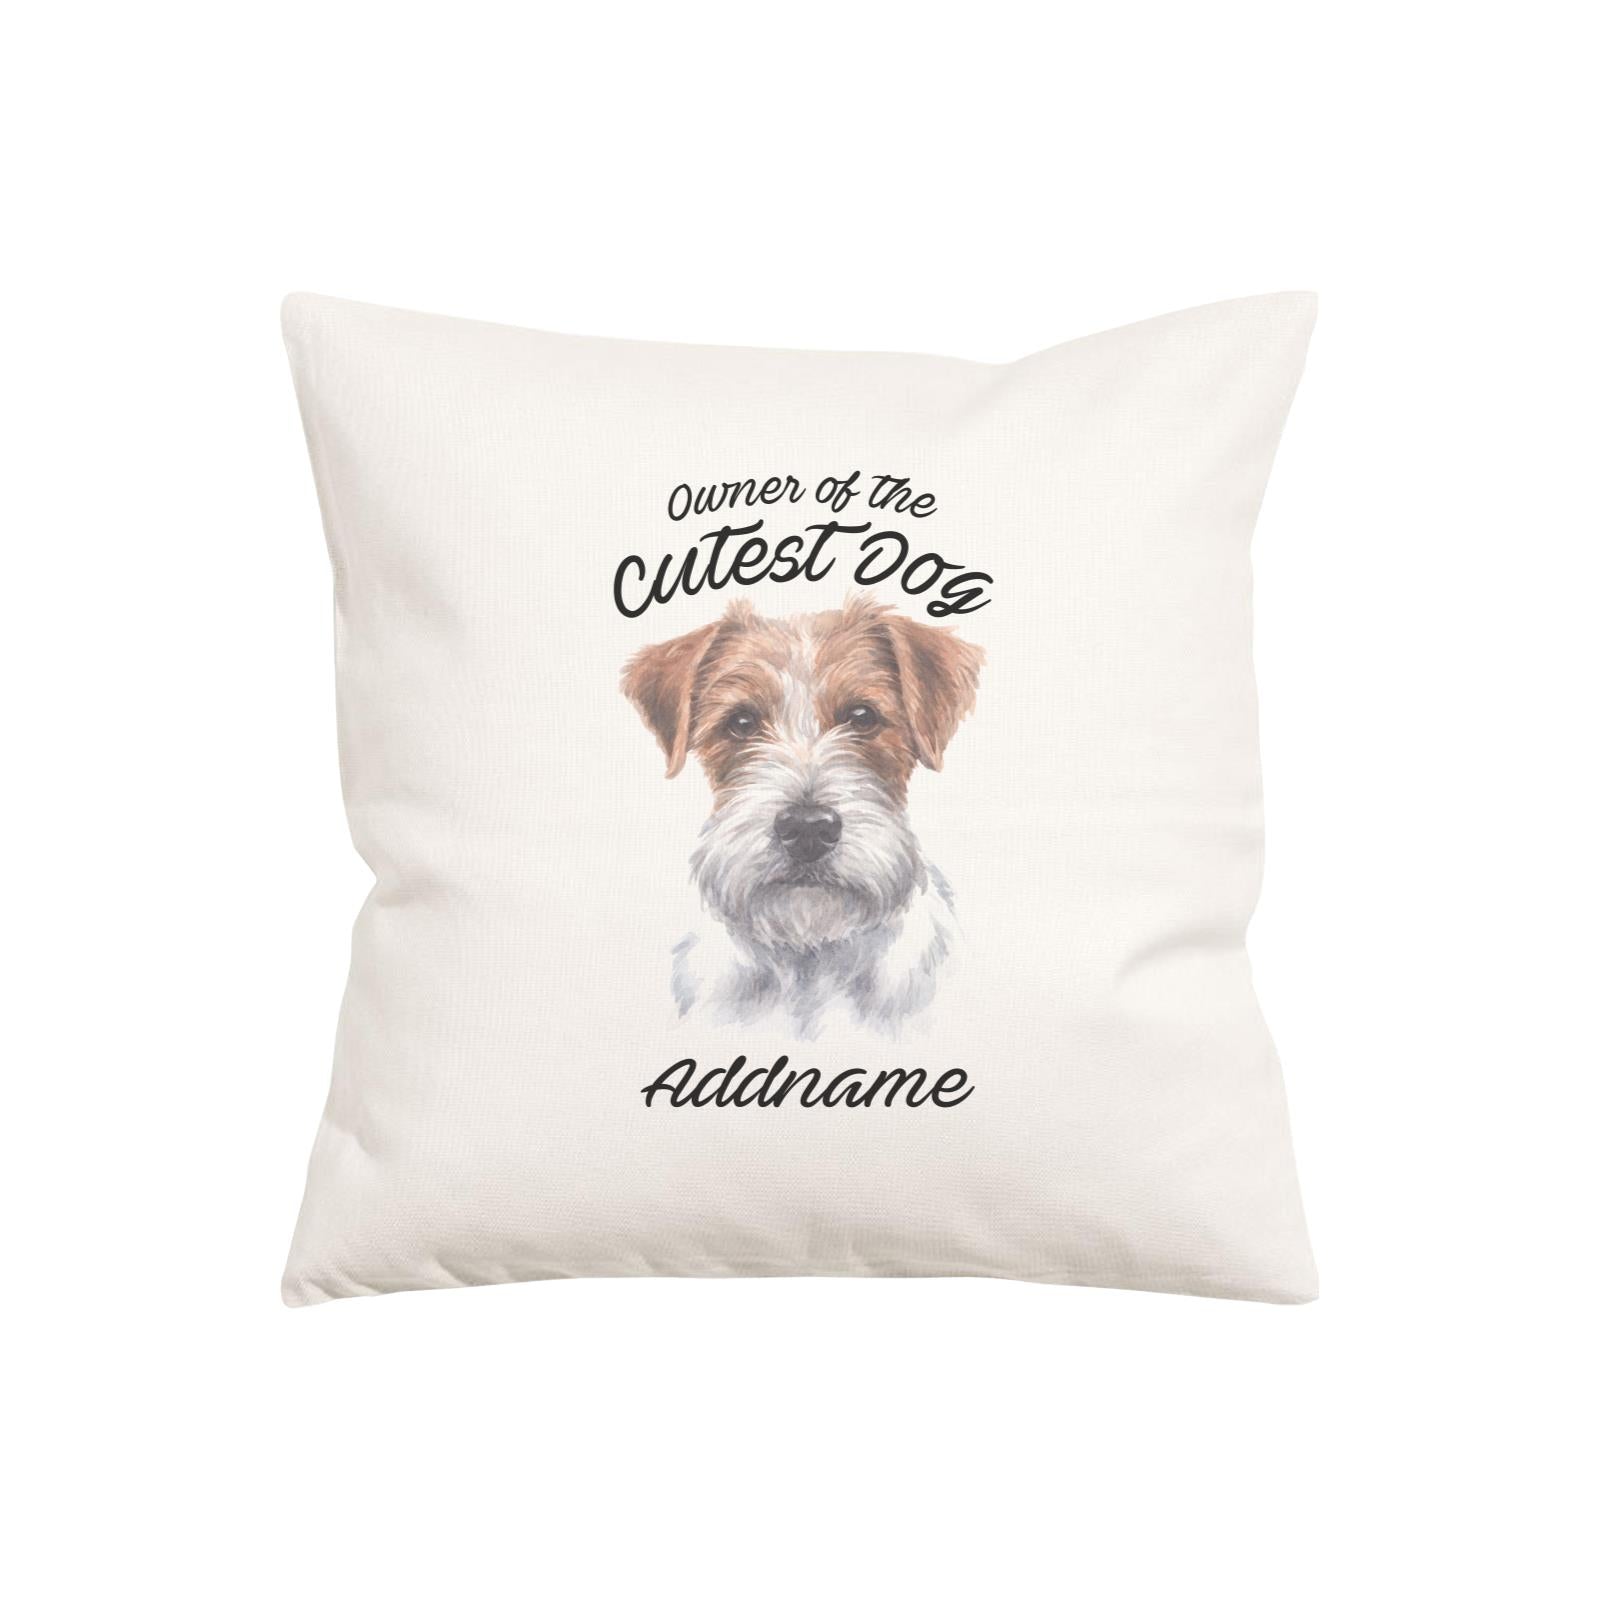 Watercolor Dog Owner Of The Cutest Dog Jack Russell Long Hair Addname Pillow Cushion